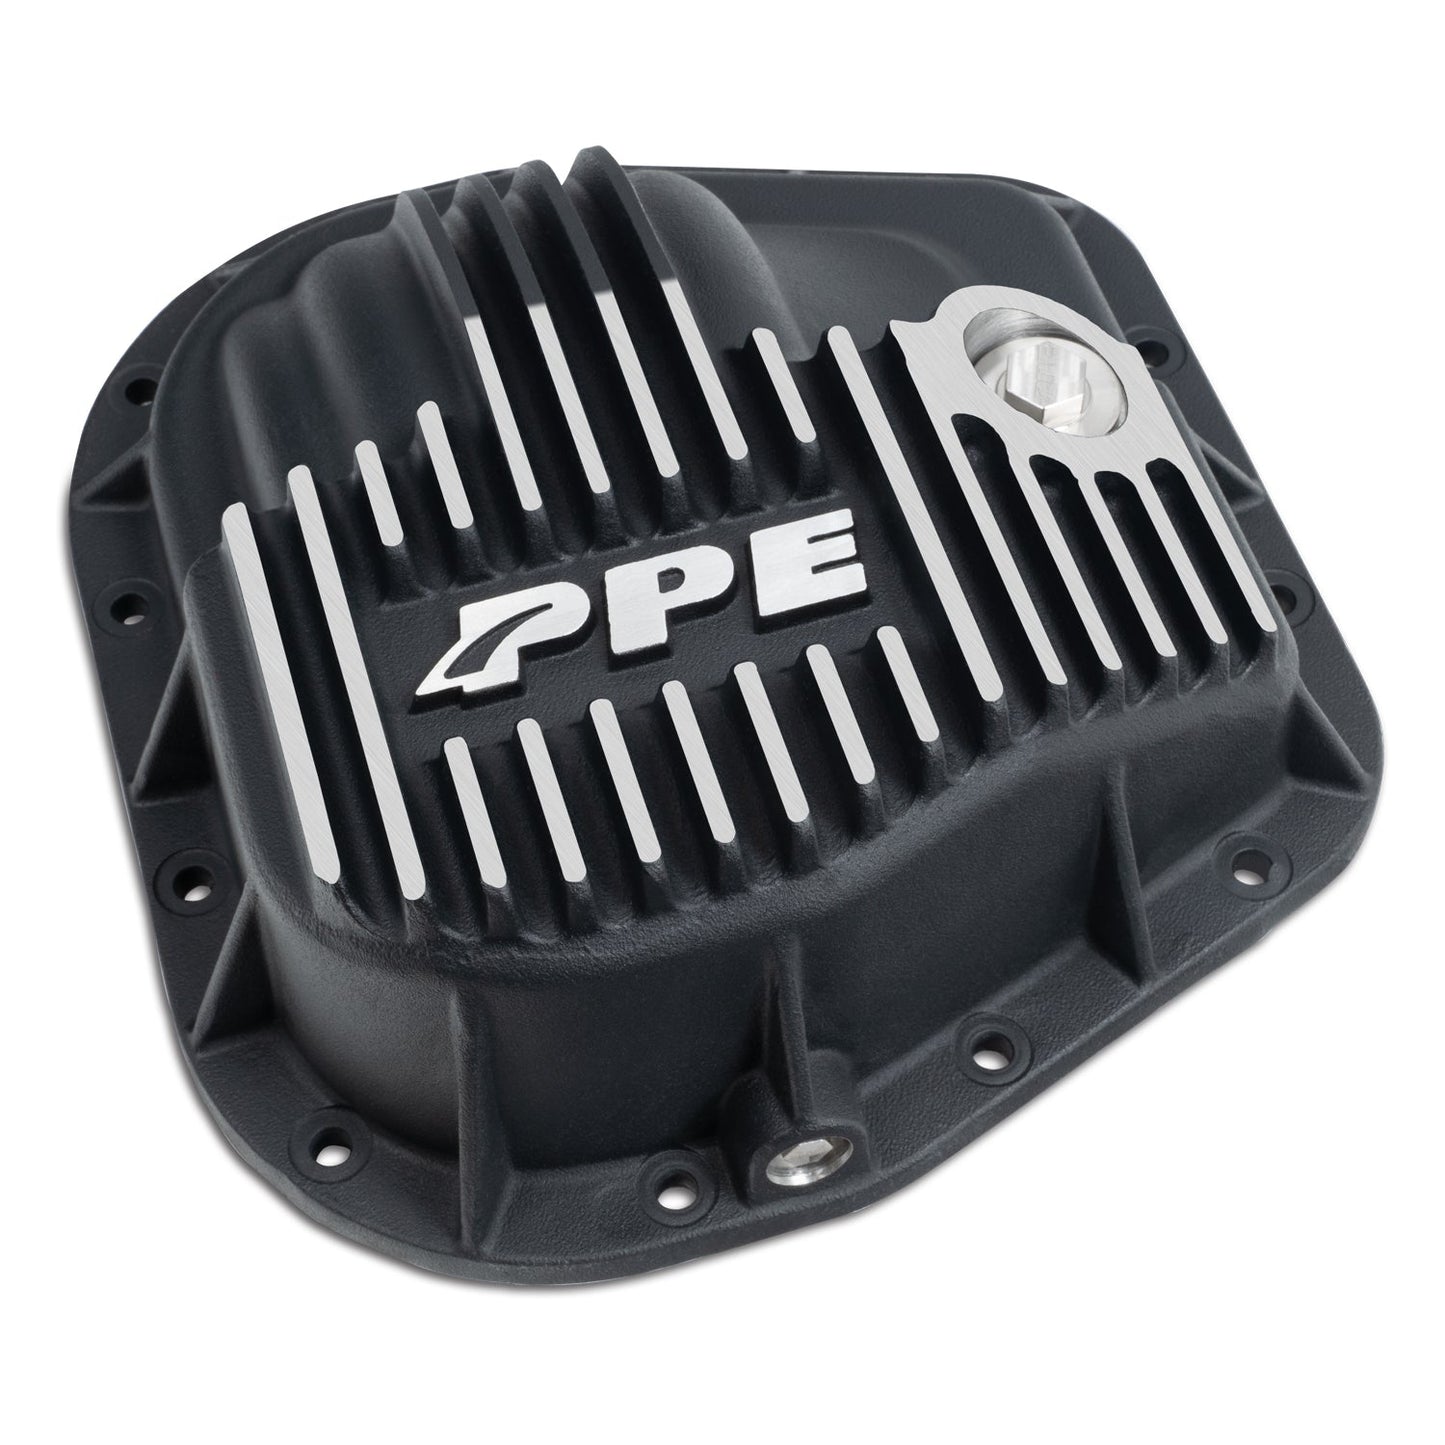 1994-2023 Ford F150/SUV 9.75"-12 Heavy-Duty Cast Aluminum Rear Differential Cover ppepower